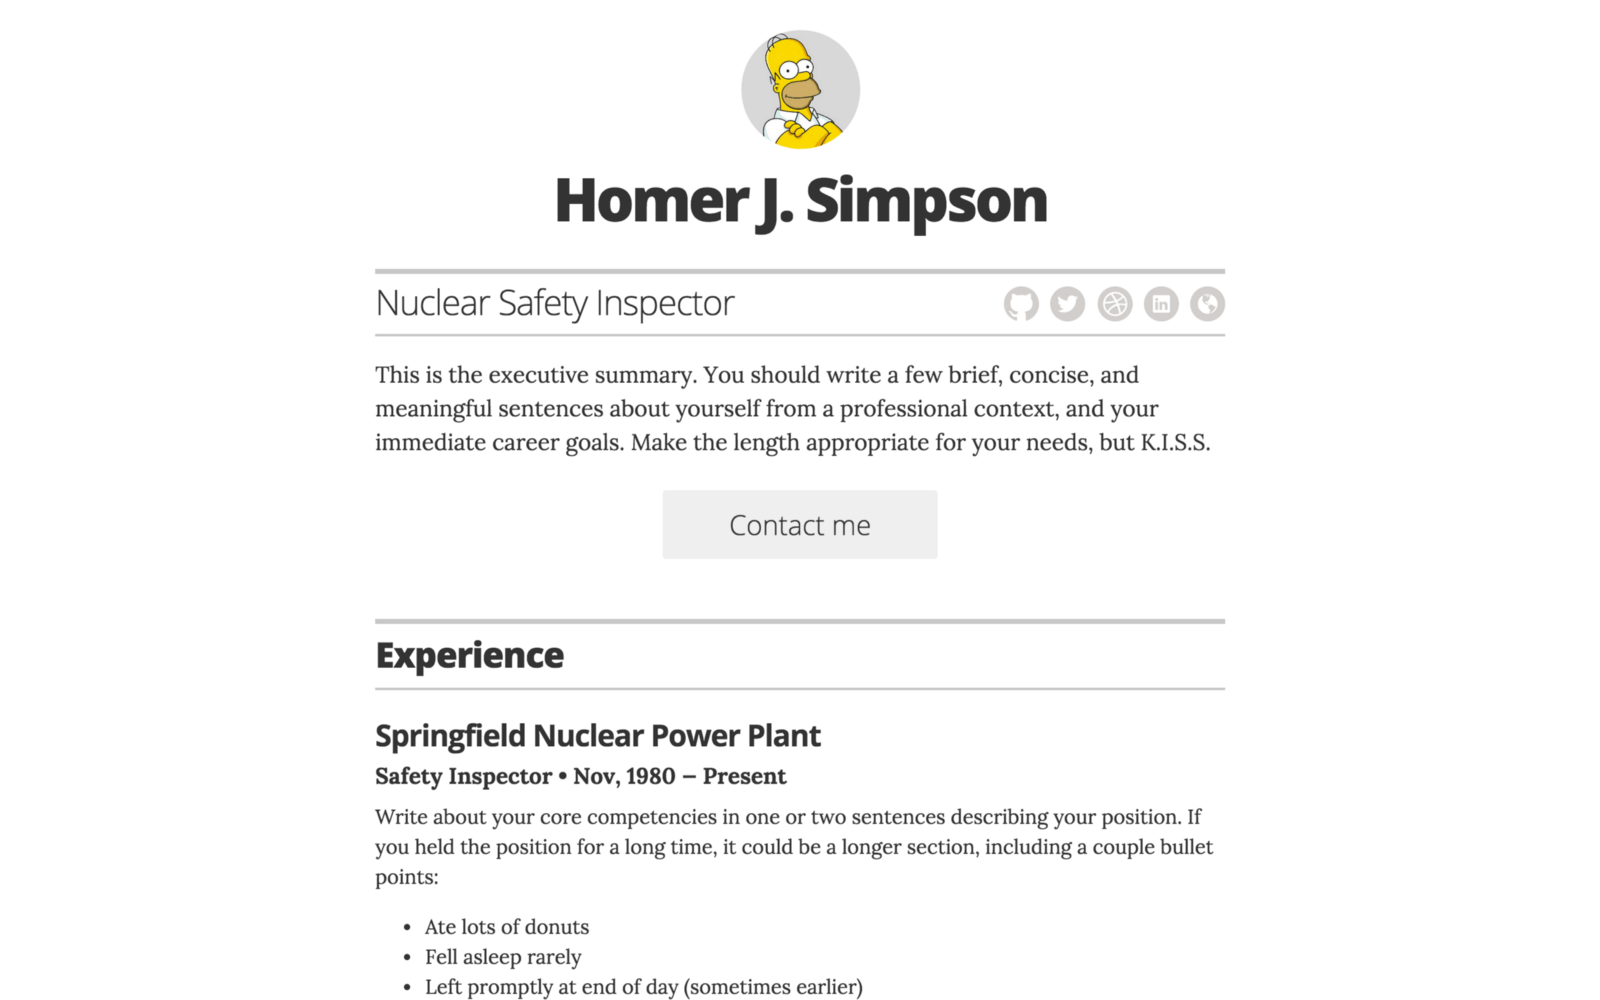 GitHub Resume Logo - How to create an online resume powered by Jekyll and GitHub Pages